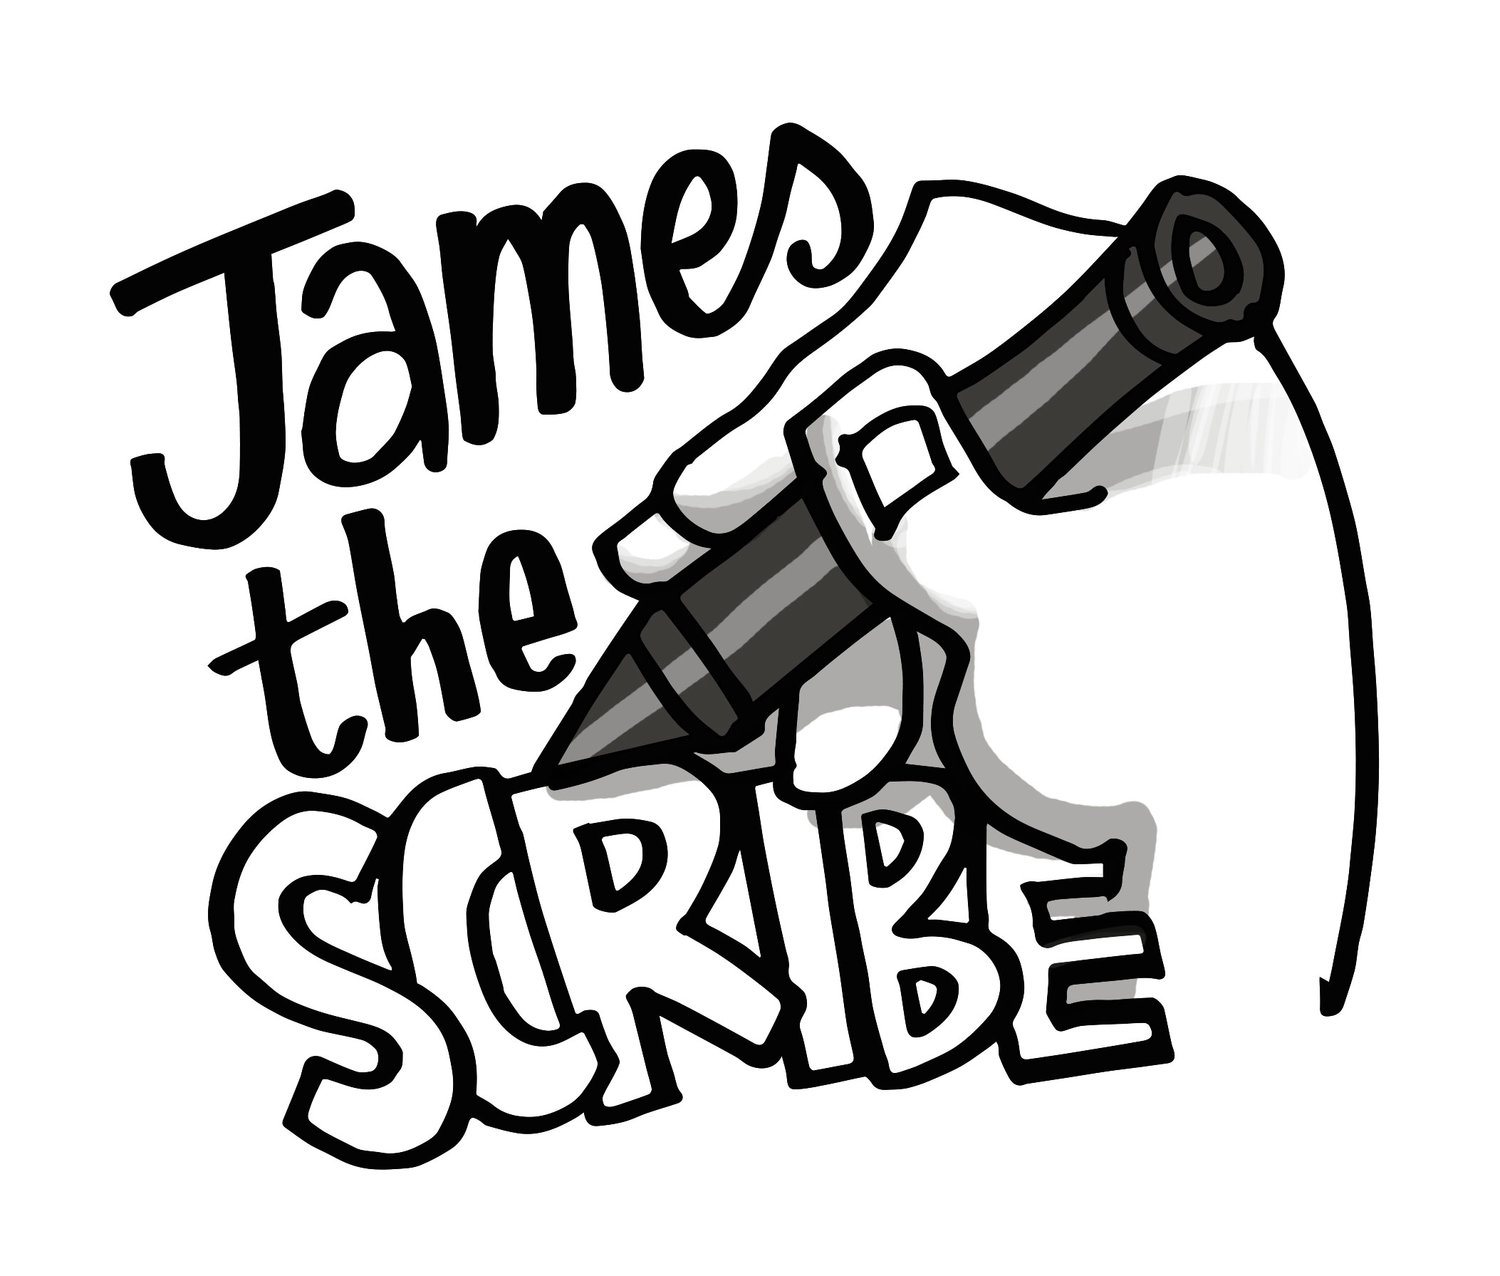 James the Scribe